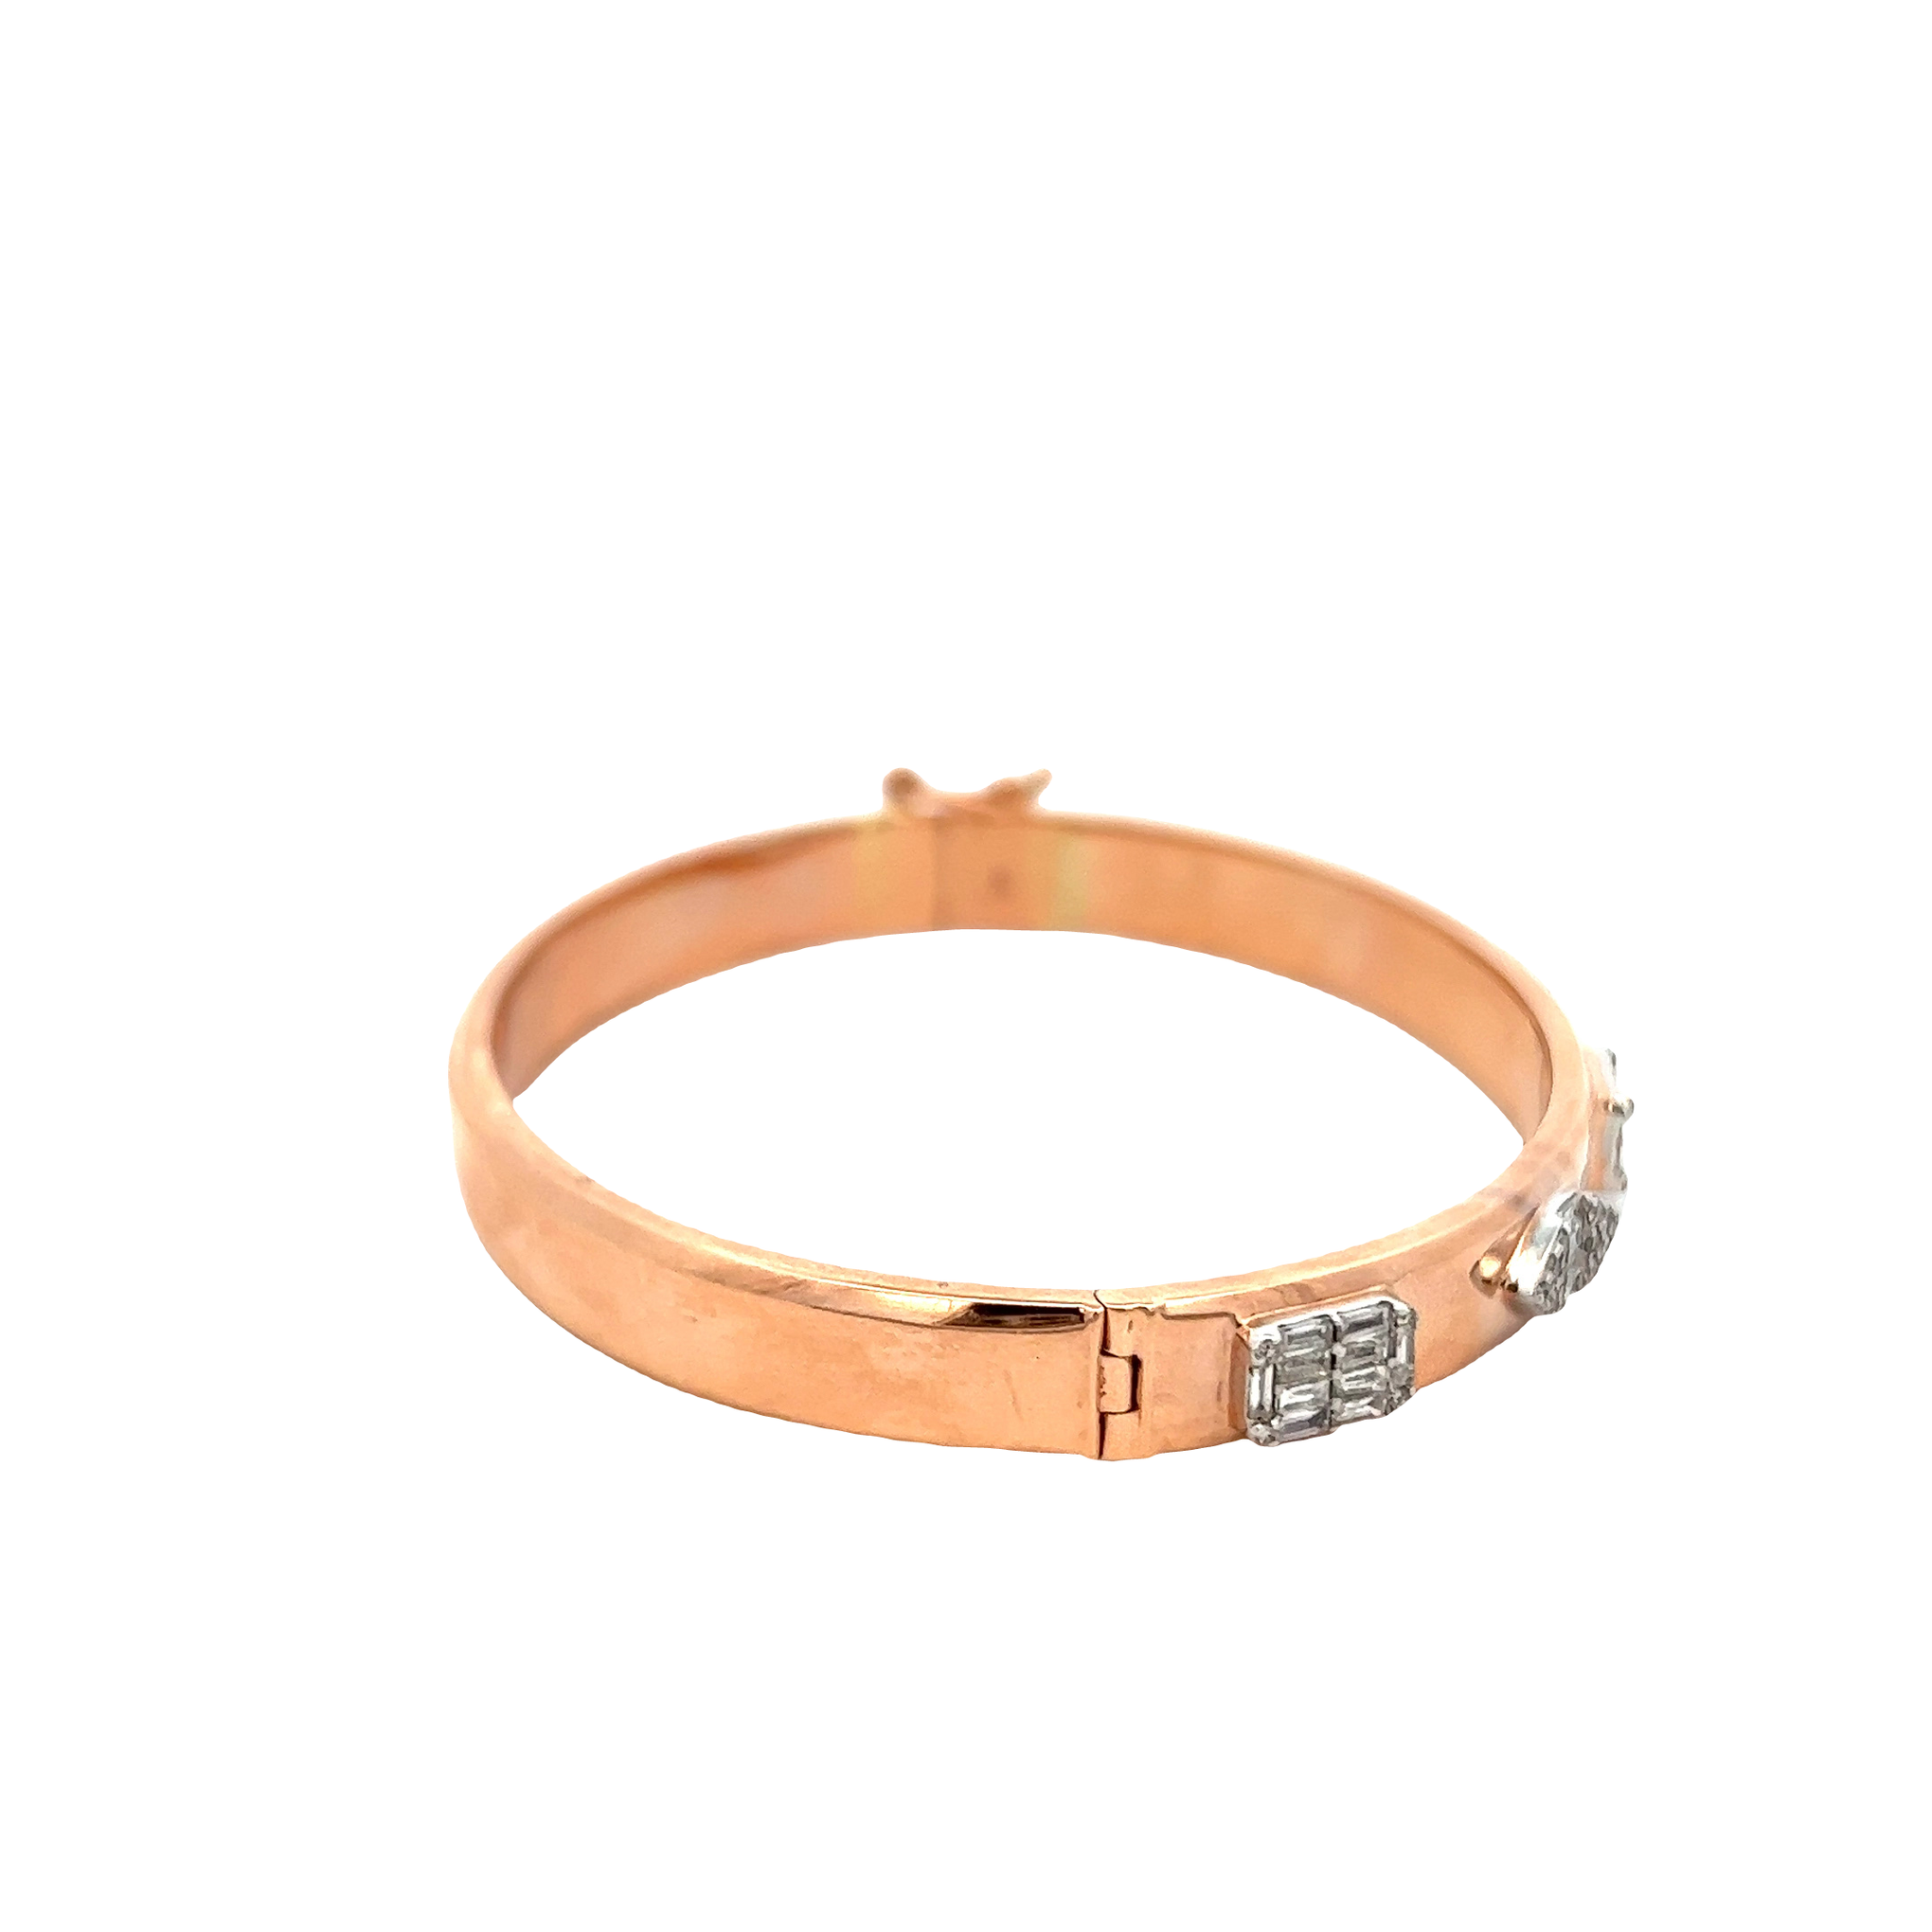 14KT ROSE GOLD WITH ROUND AND BAGUETTE CUT DIAMONDS ALTERNATING SHAPE BRACELET.